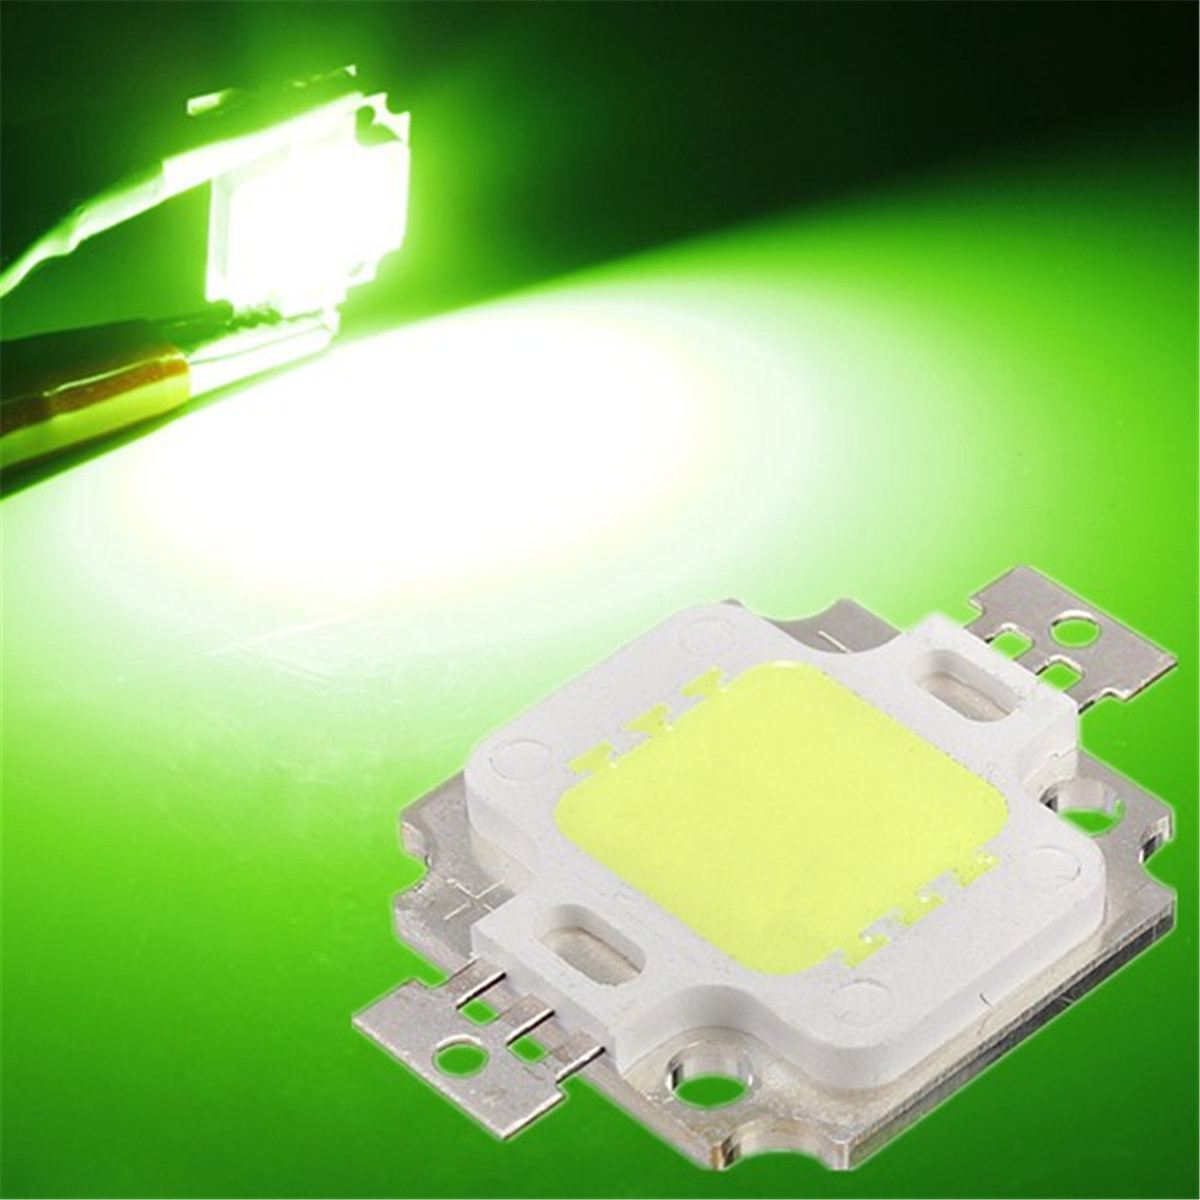 LUSTREON-Multicolor-10W-High-Power-LED-Chip-Ceiling-Down-Flood-Light-Lamp-Accessories-DC9-12V-1039799